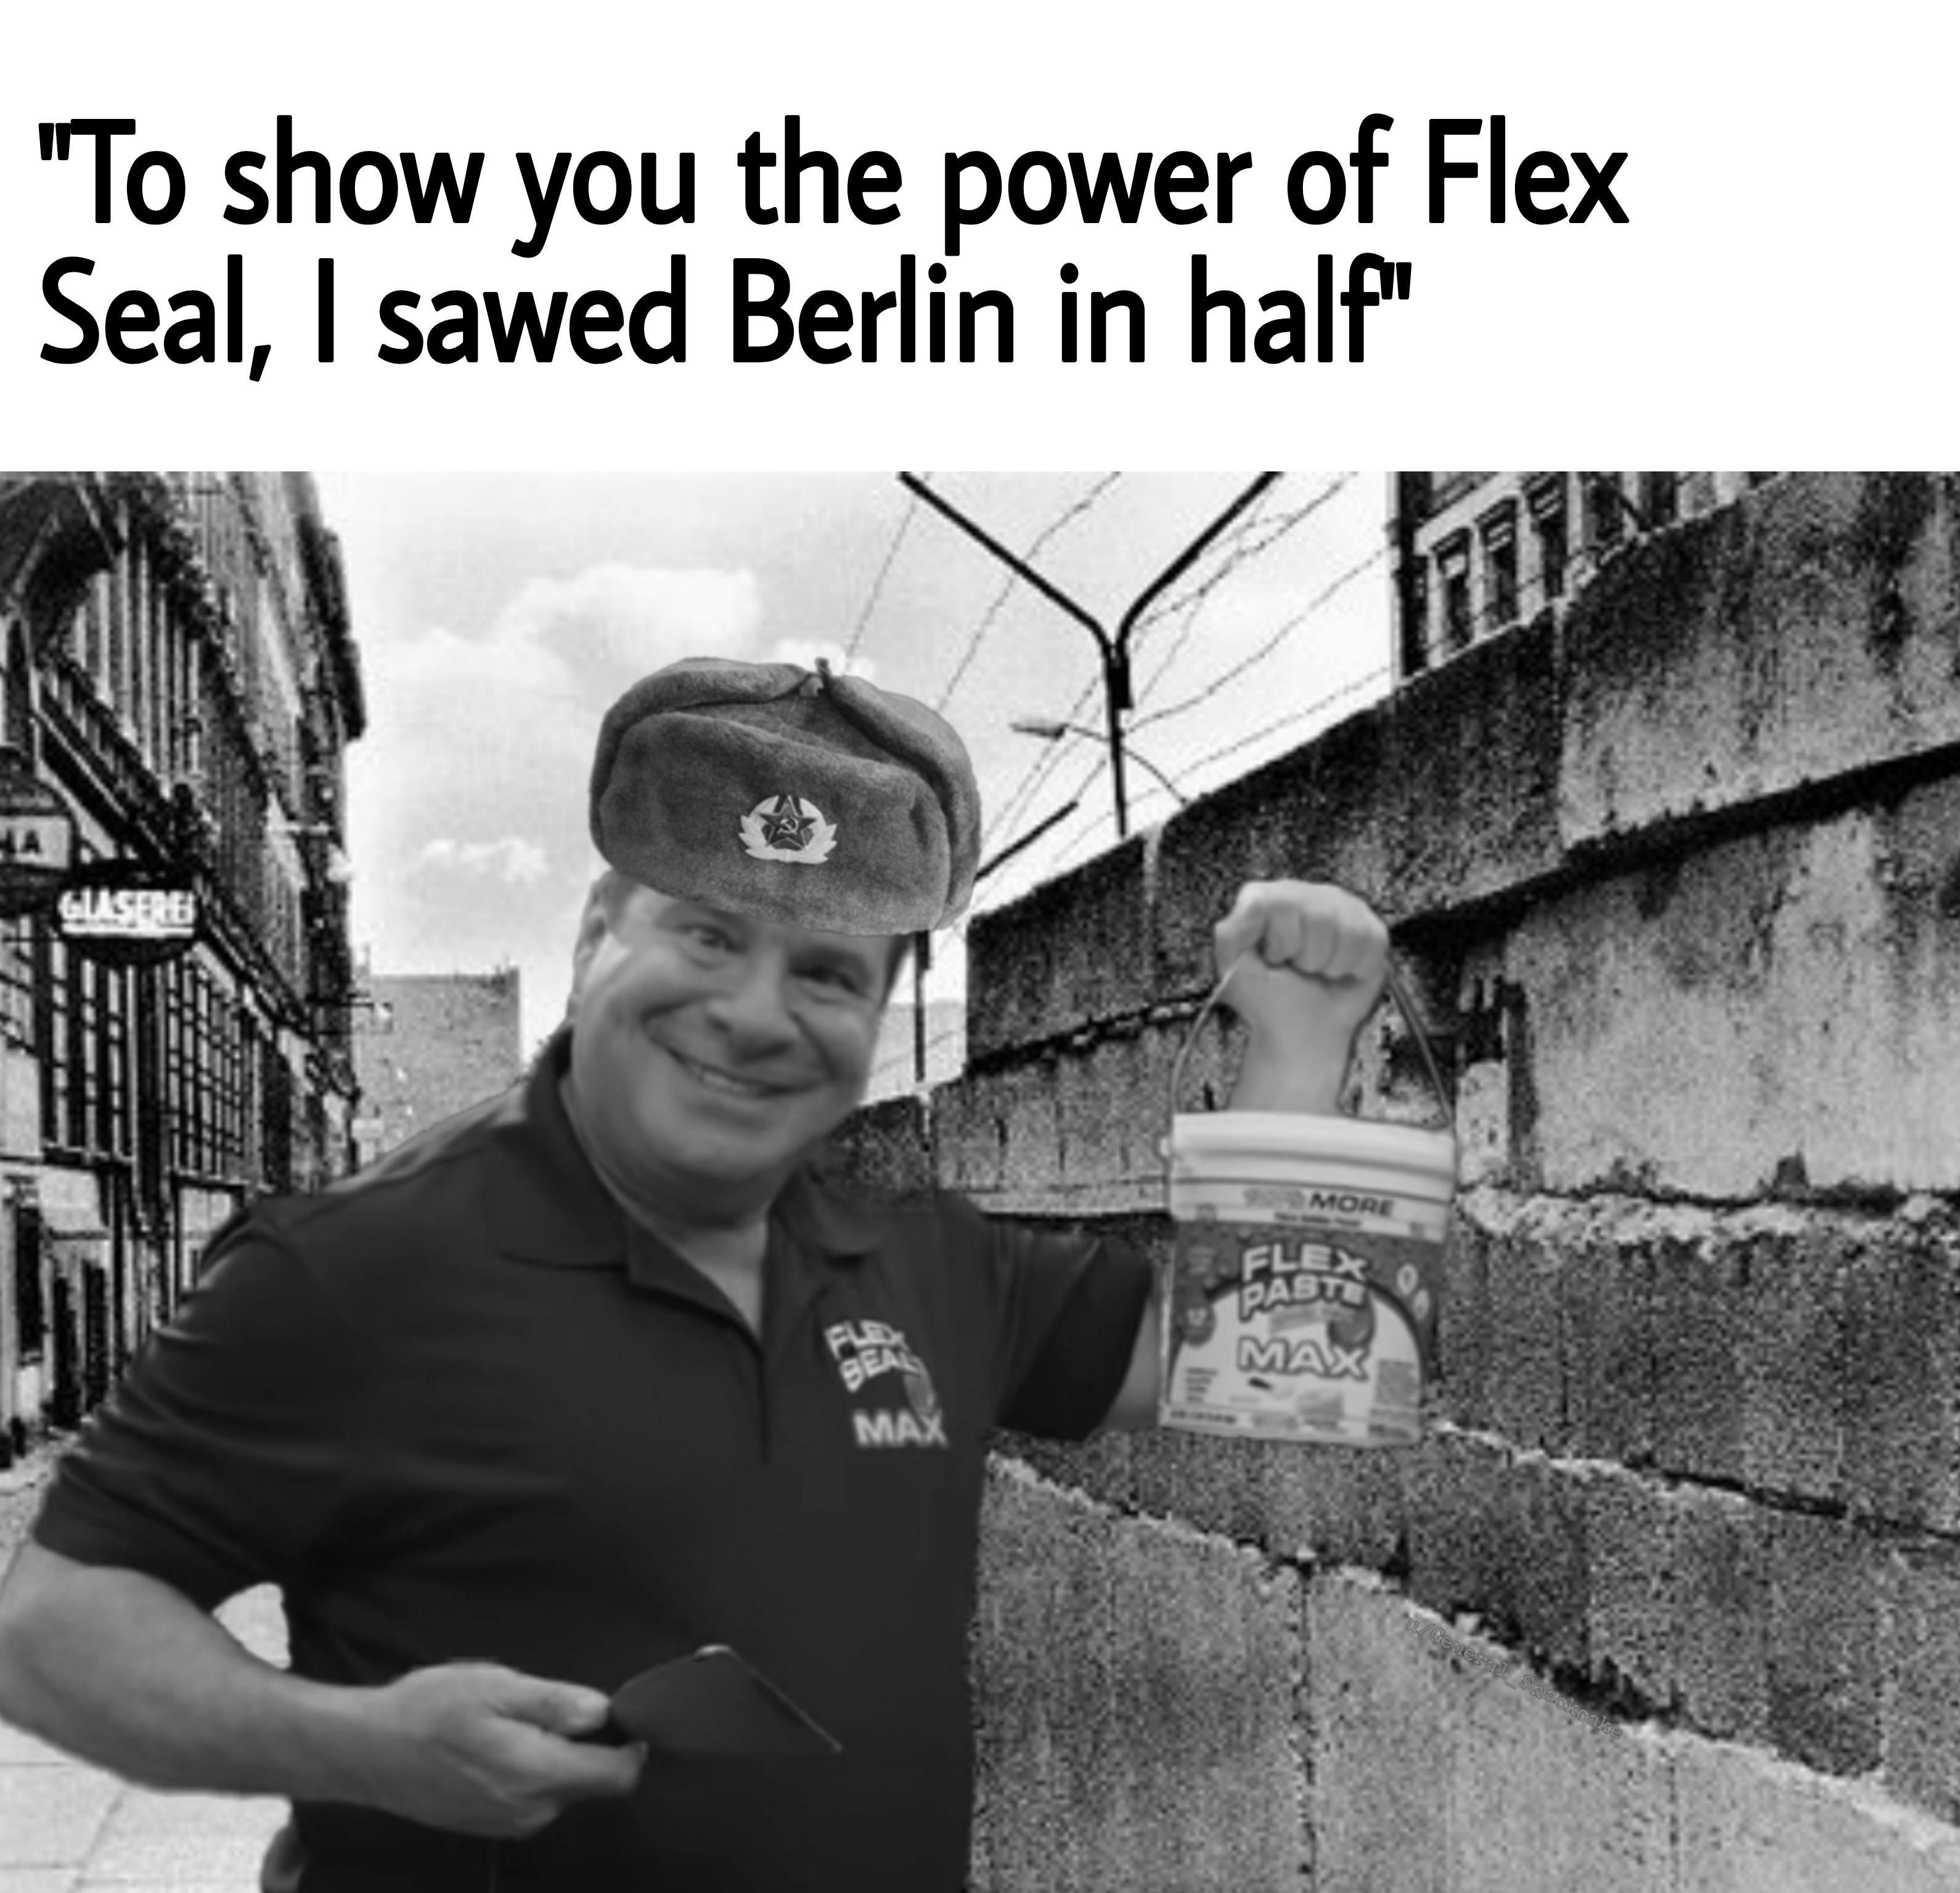 Flex Seal, the newest invention from Soviet Scientists